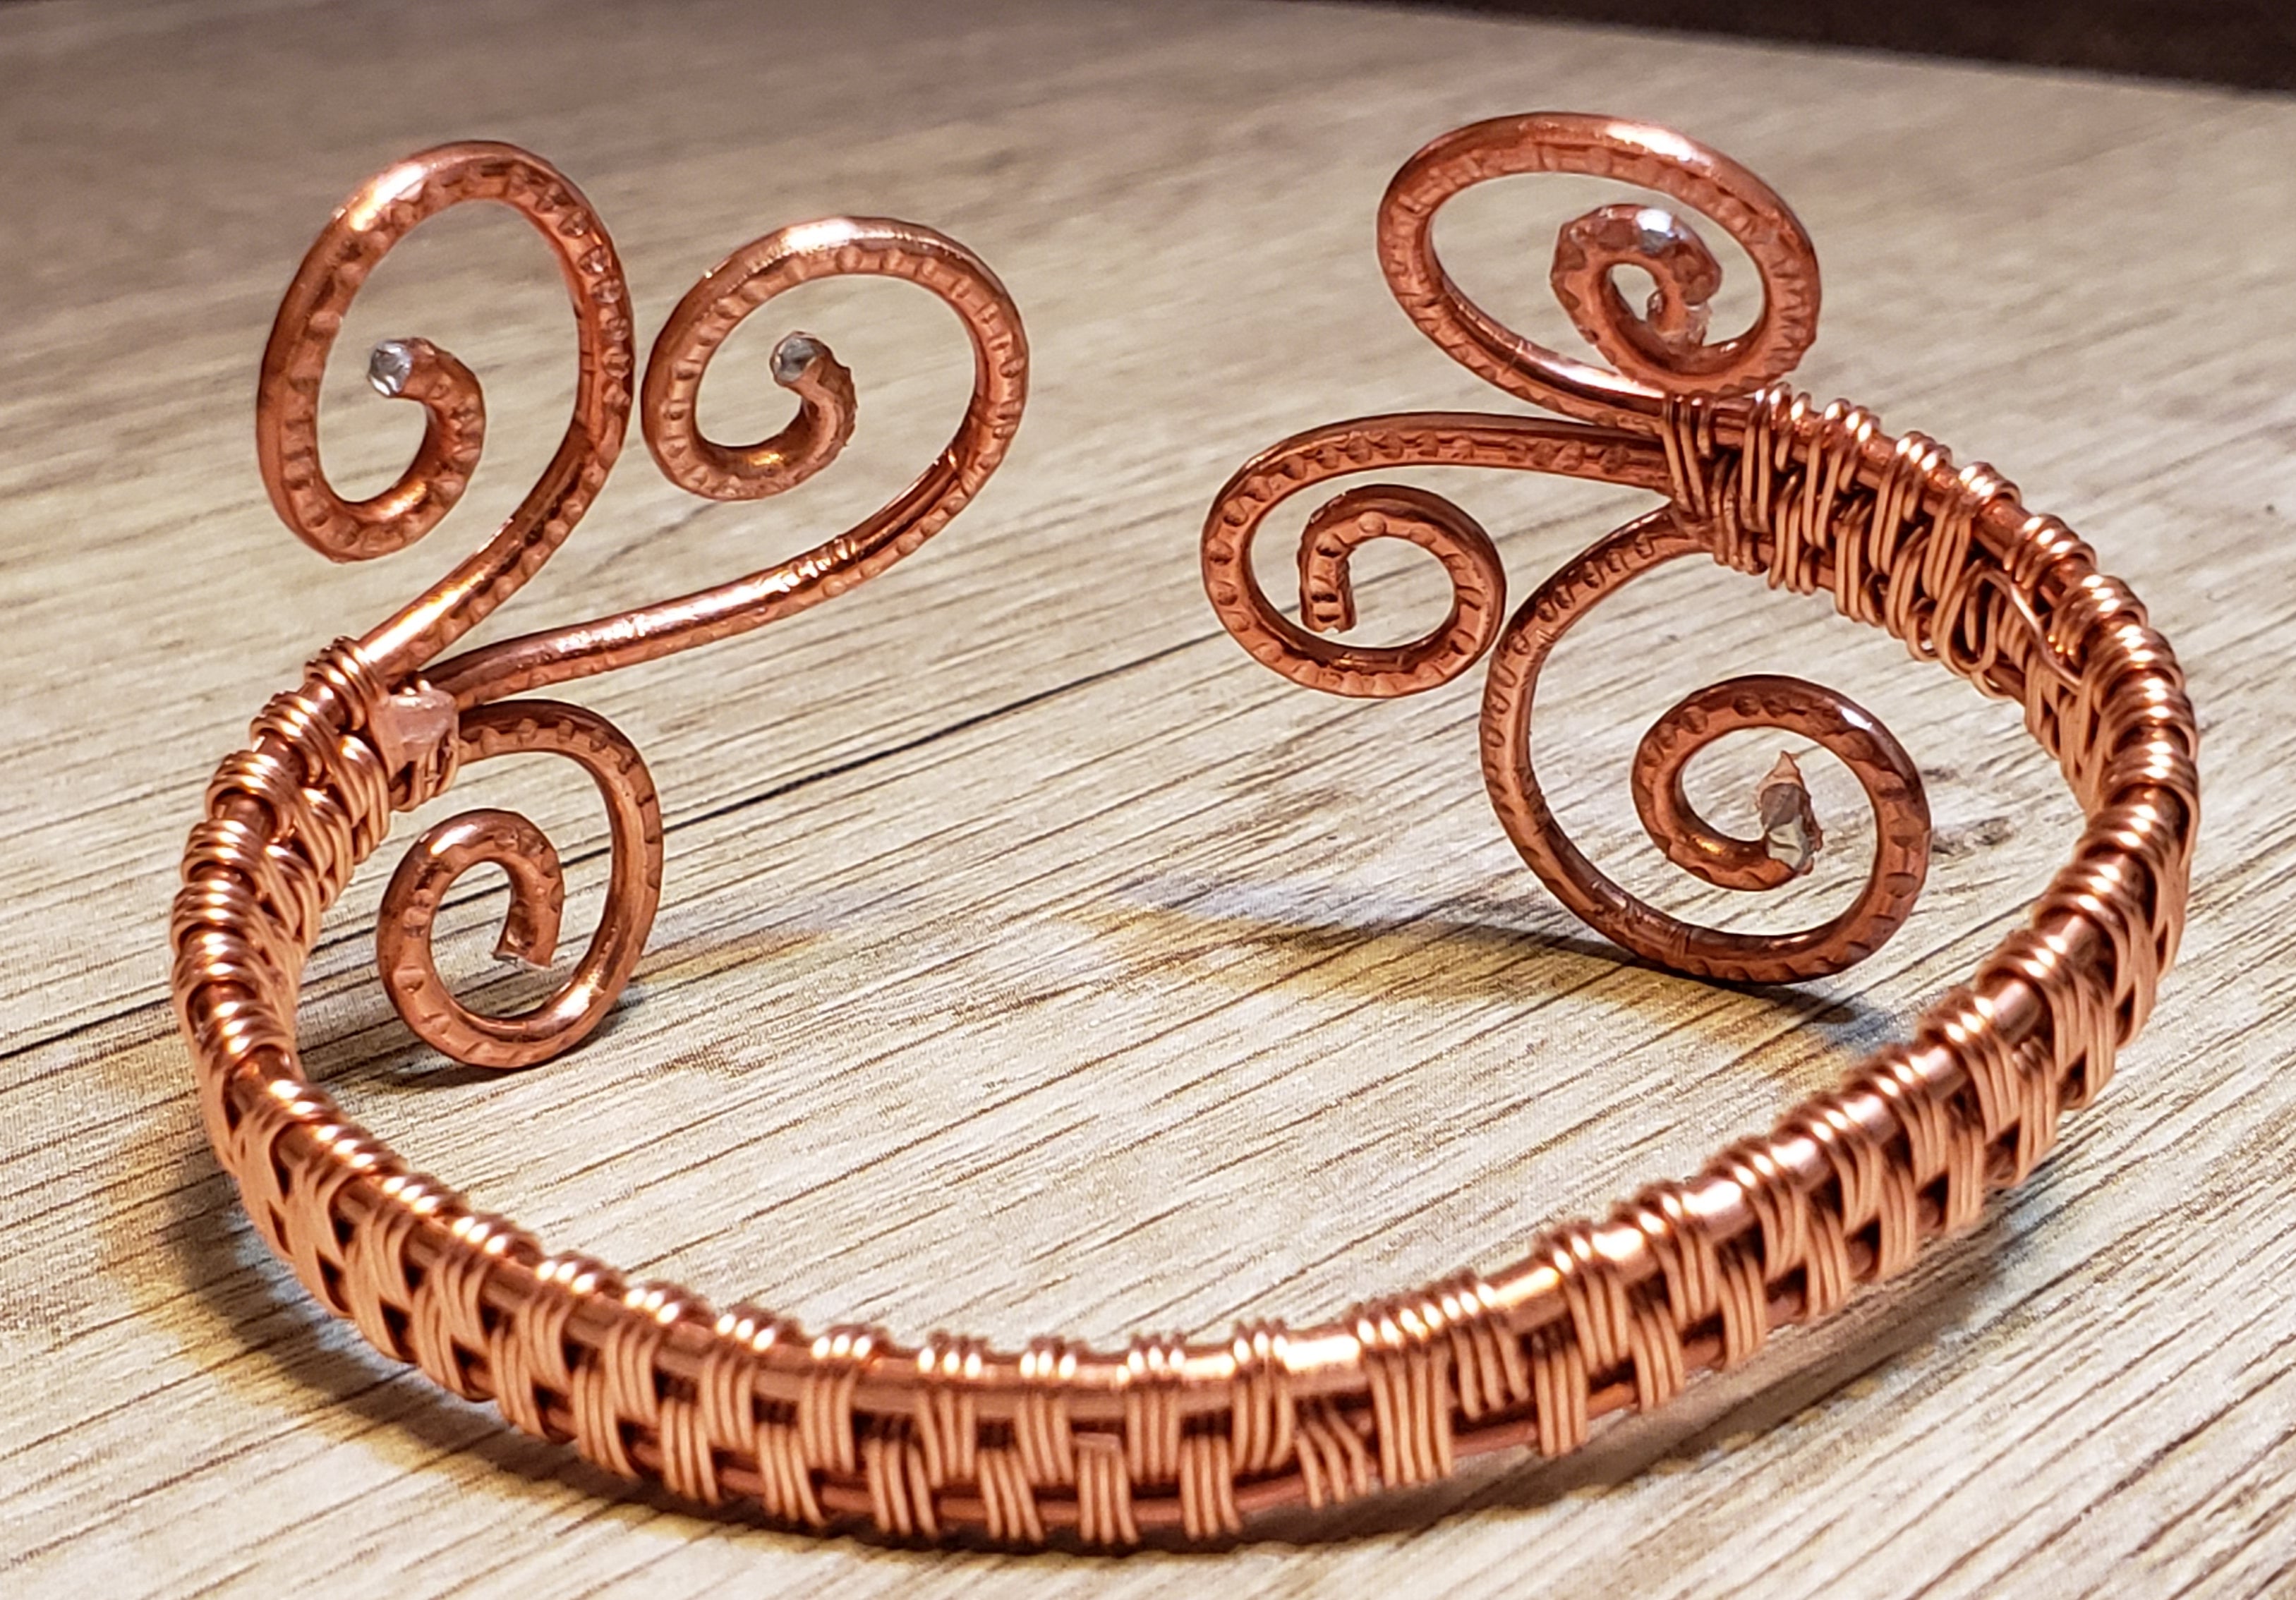 Handcrafted Copper Rope Motif Chain Bracelet from Mexico - Bright